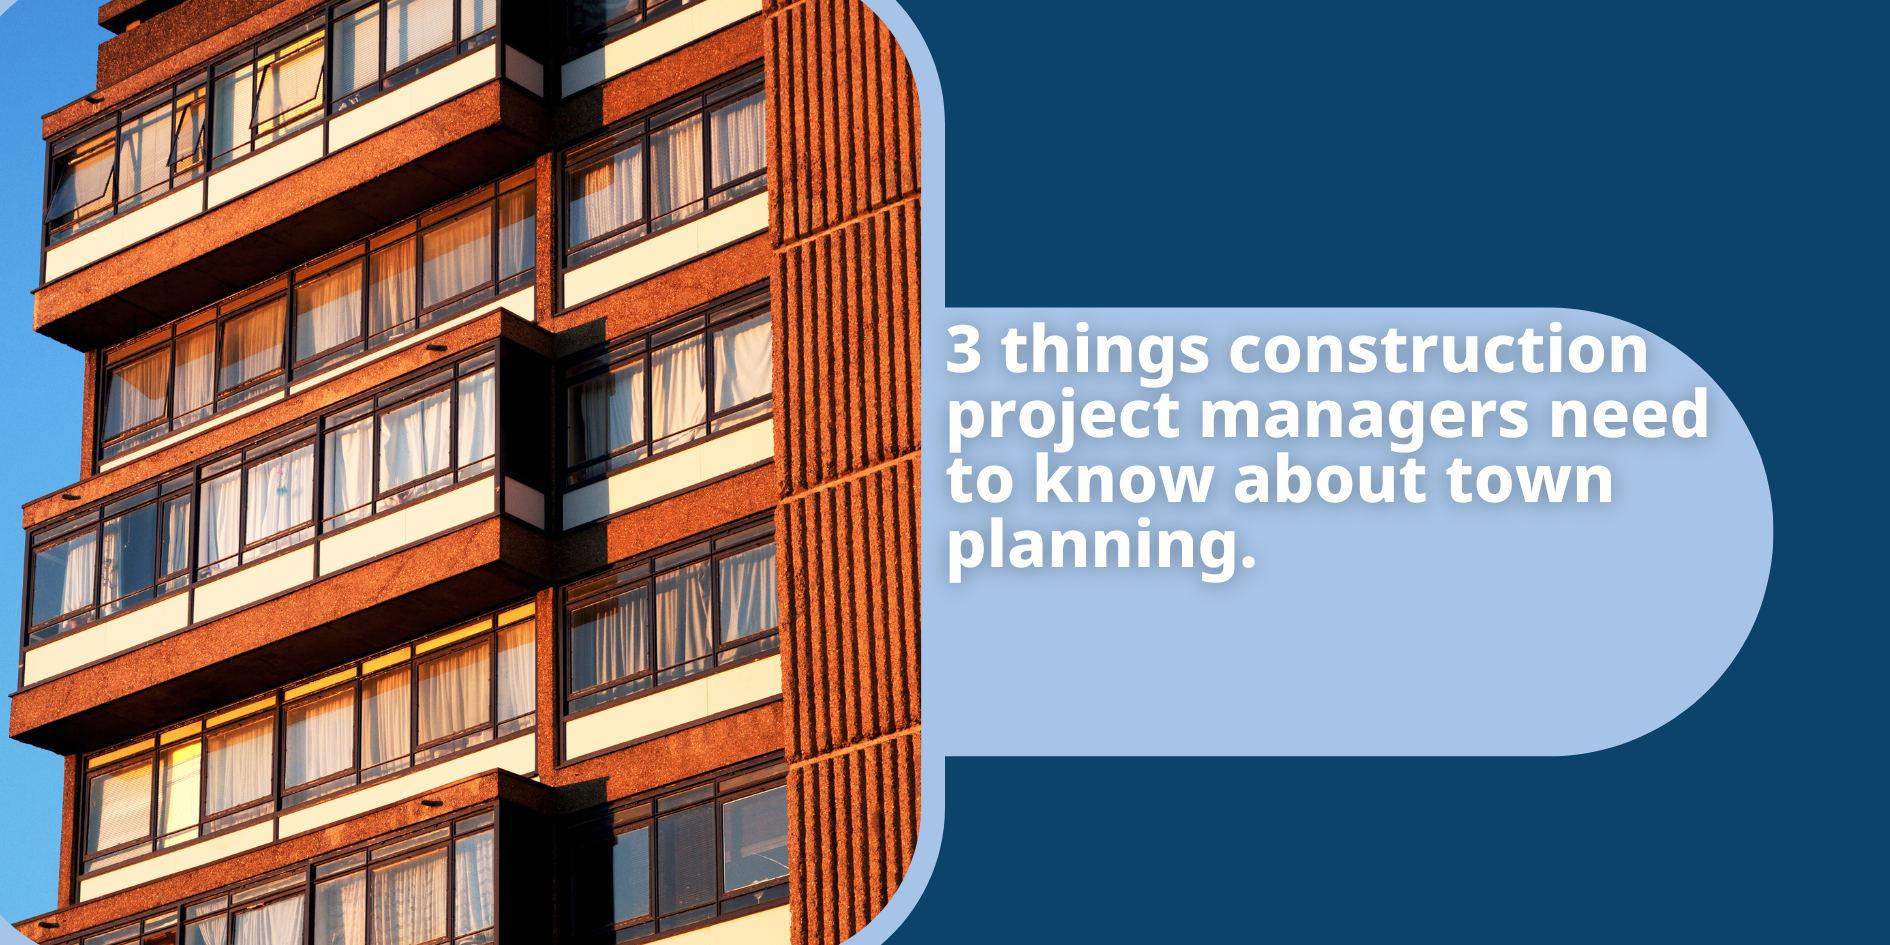 Three things construction project managers need to know about town planning